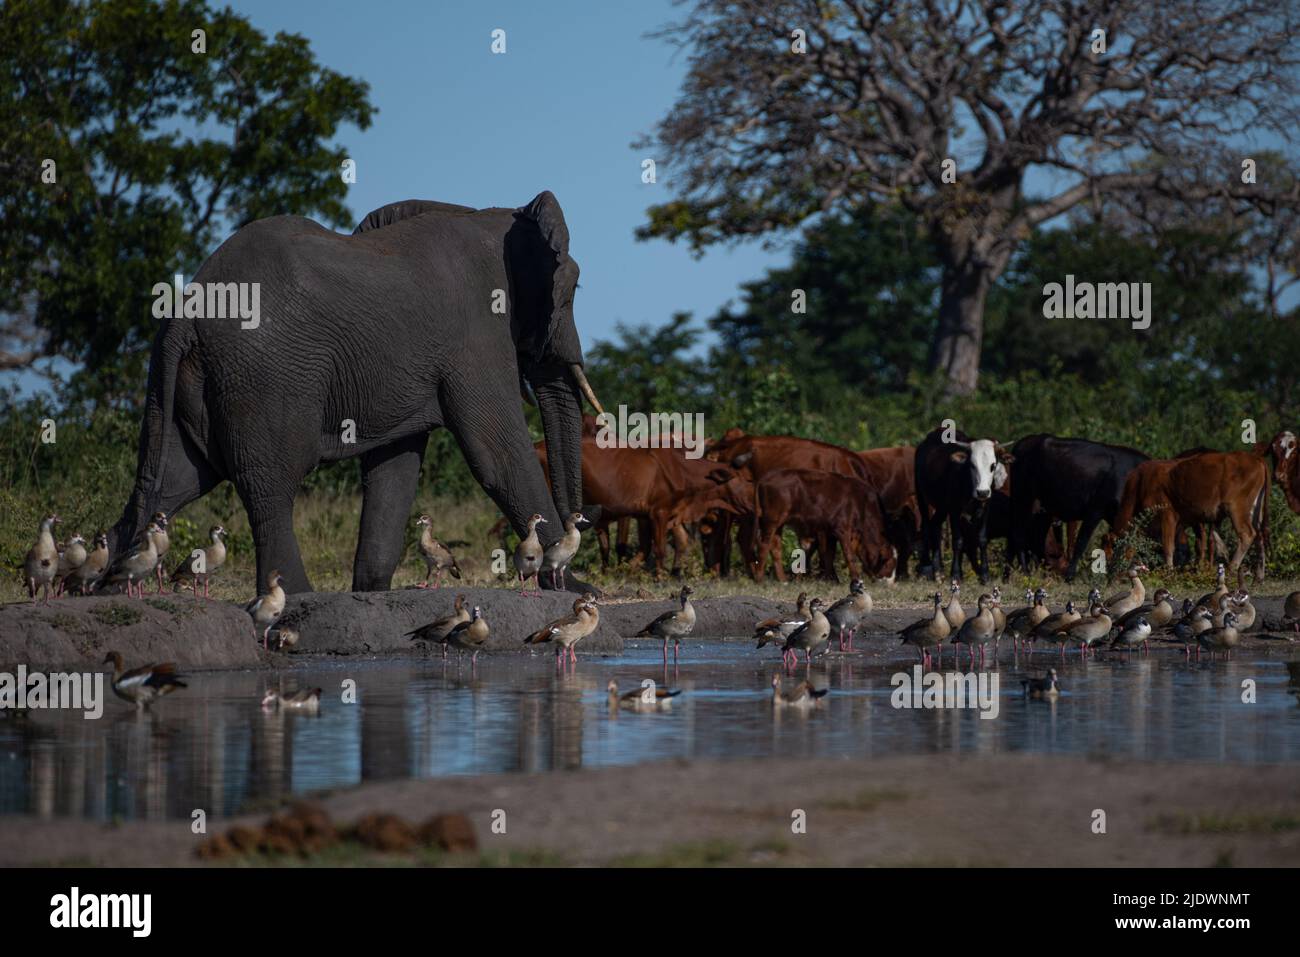 An elephant interacting with cattle in Botswana Stock Photo